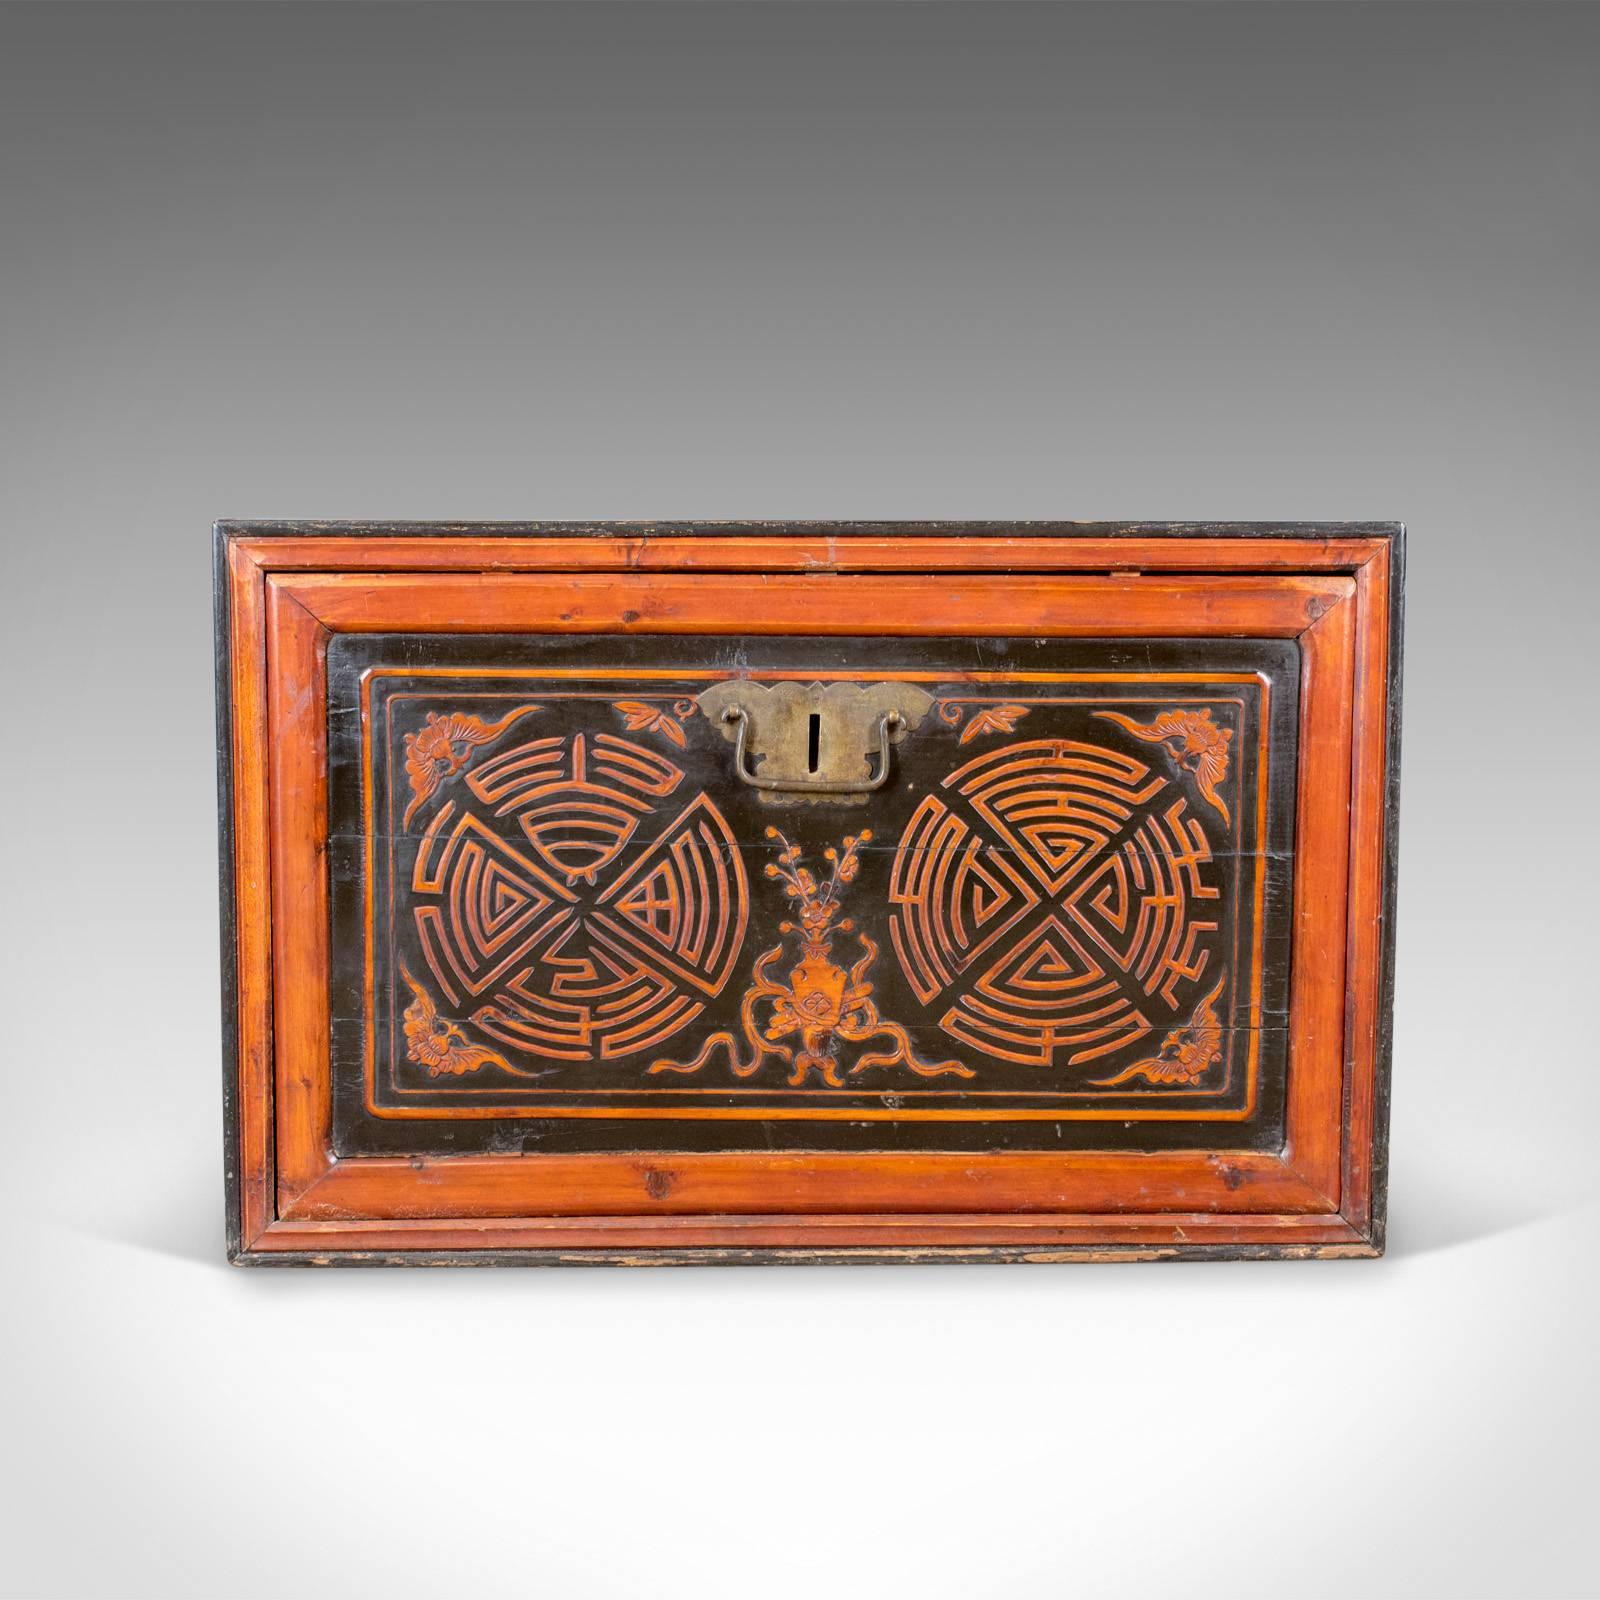 This is a Japanese antique chest, a lacquered pine trunk or blanket box dating to the late 19th century, circa 1900.

A fine example displaying good colour and finish
The front, locking panel displaying geometric form 
Side panels decorated with